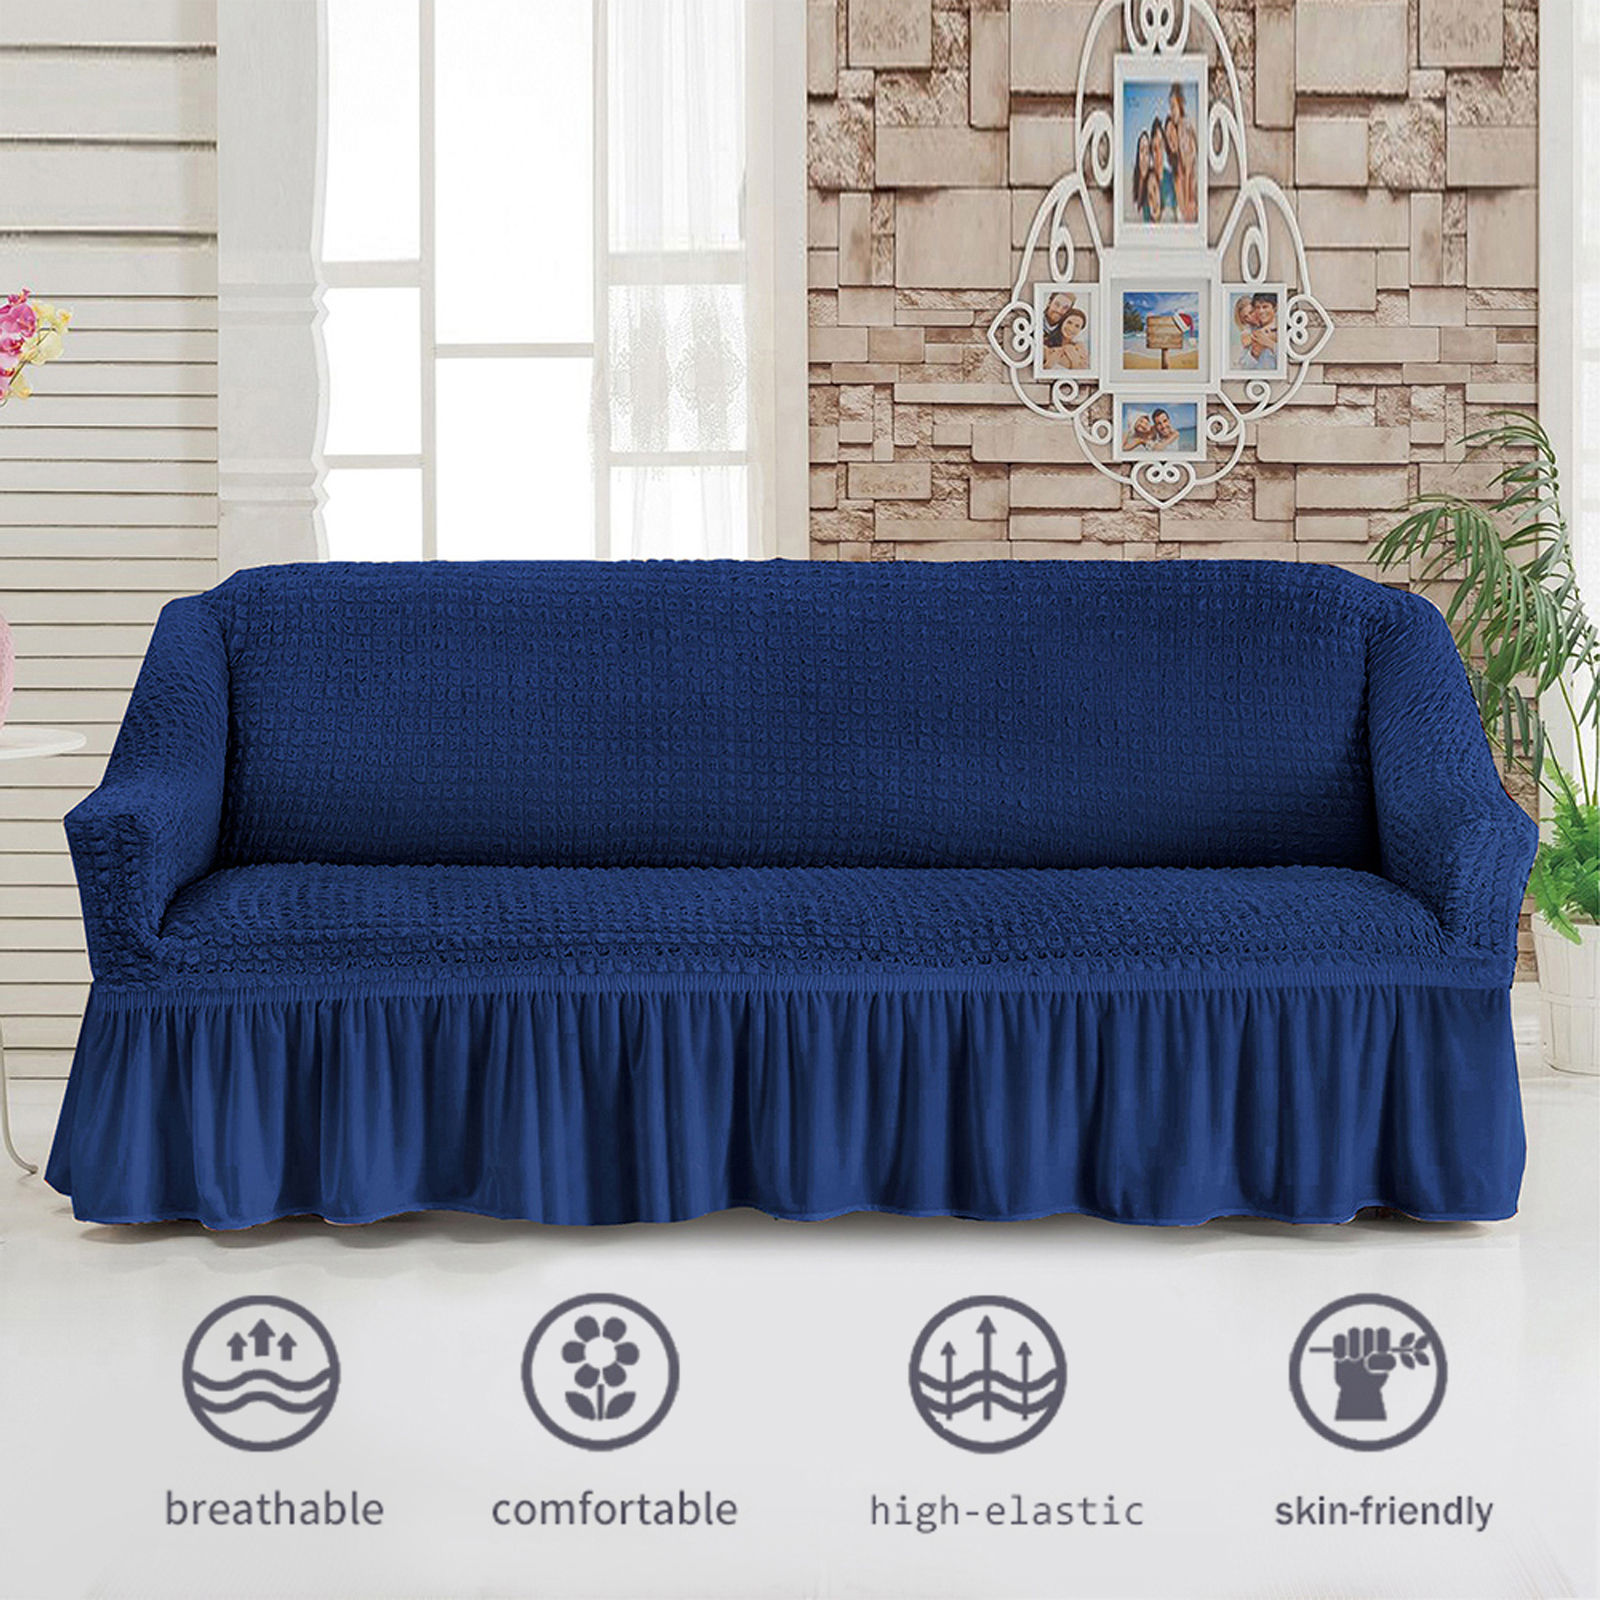 Stretch Sofa Slipcover, 3 Seater Sofa Slipcovers With Skirt With Armless Soft Sofa Cover Elastic Straps Sofa Slipcover For Living Room Kids Pets-blue-Small